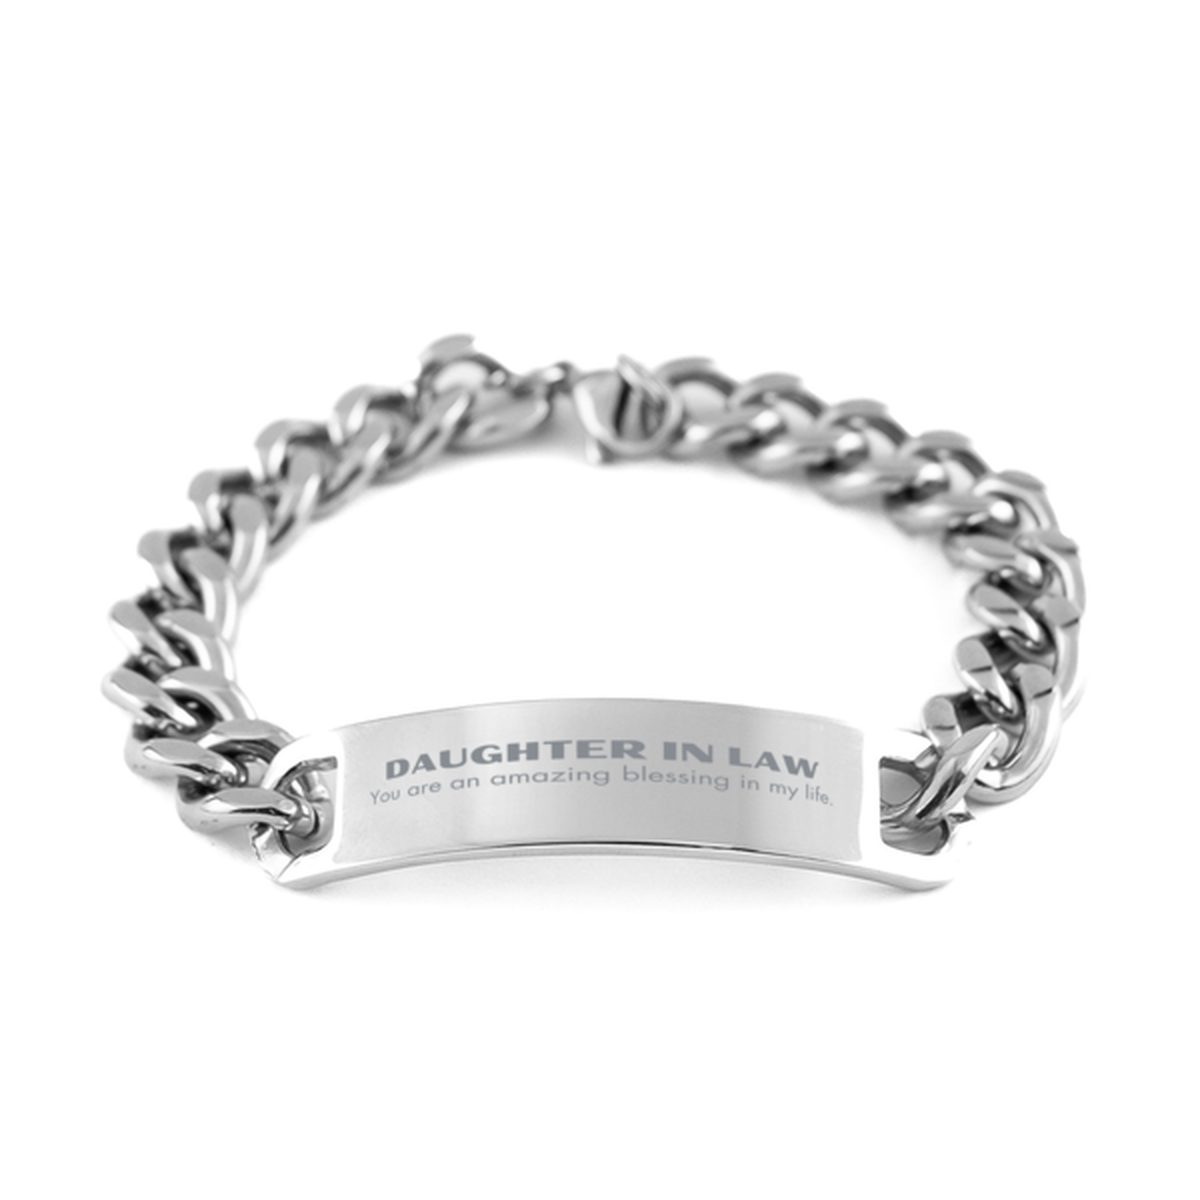 Daughter In Law Cuban Chain Stainless Steel Bracelet, You are an amazing blessing in my life, Thank You Gifts For Daughter In Law, Inspirational Birthday Christmas Unique Gifts For Daughter In Law